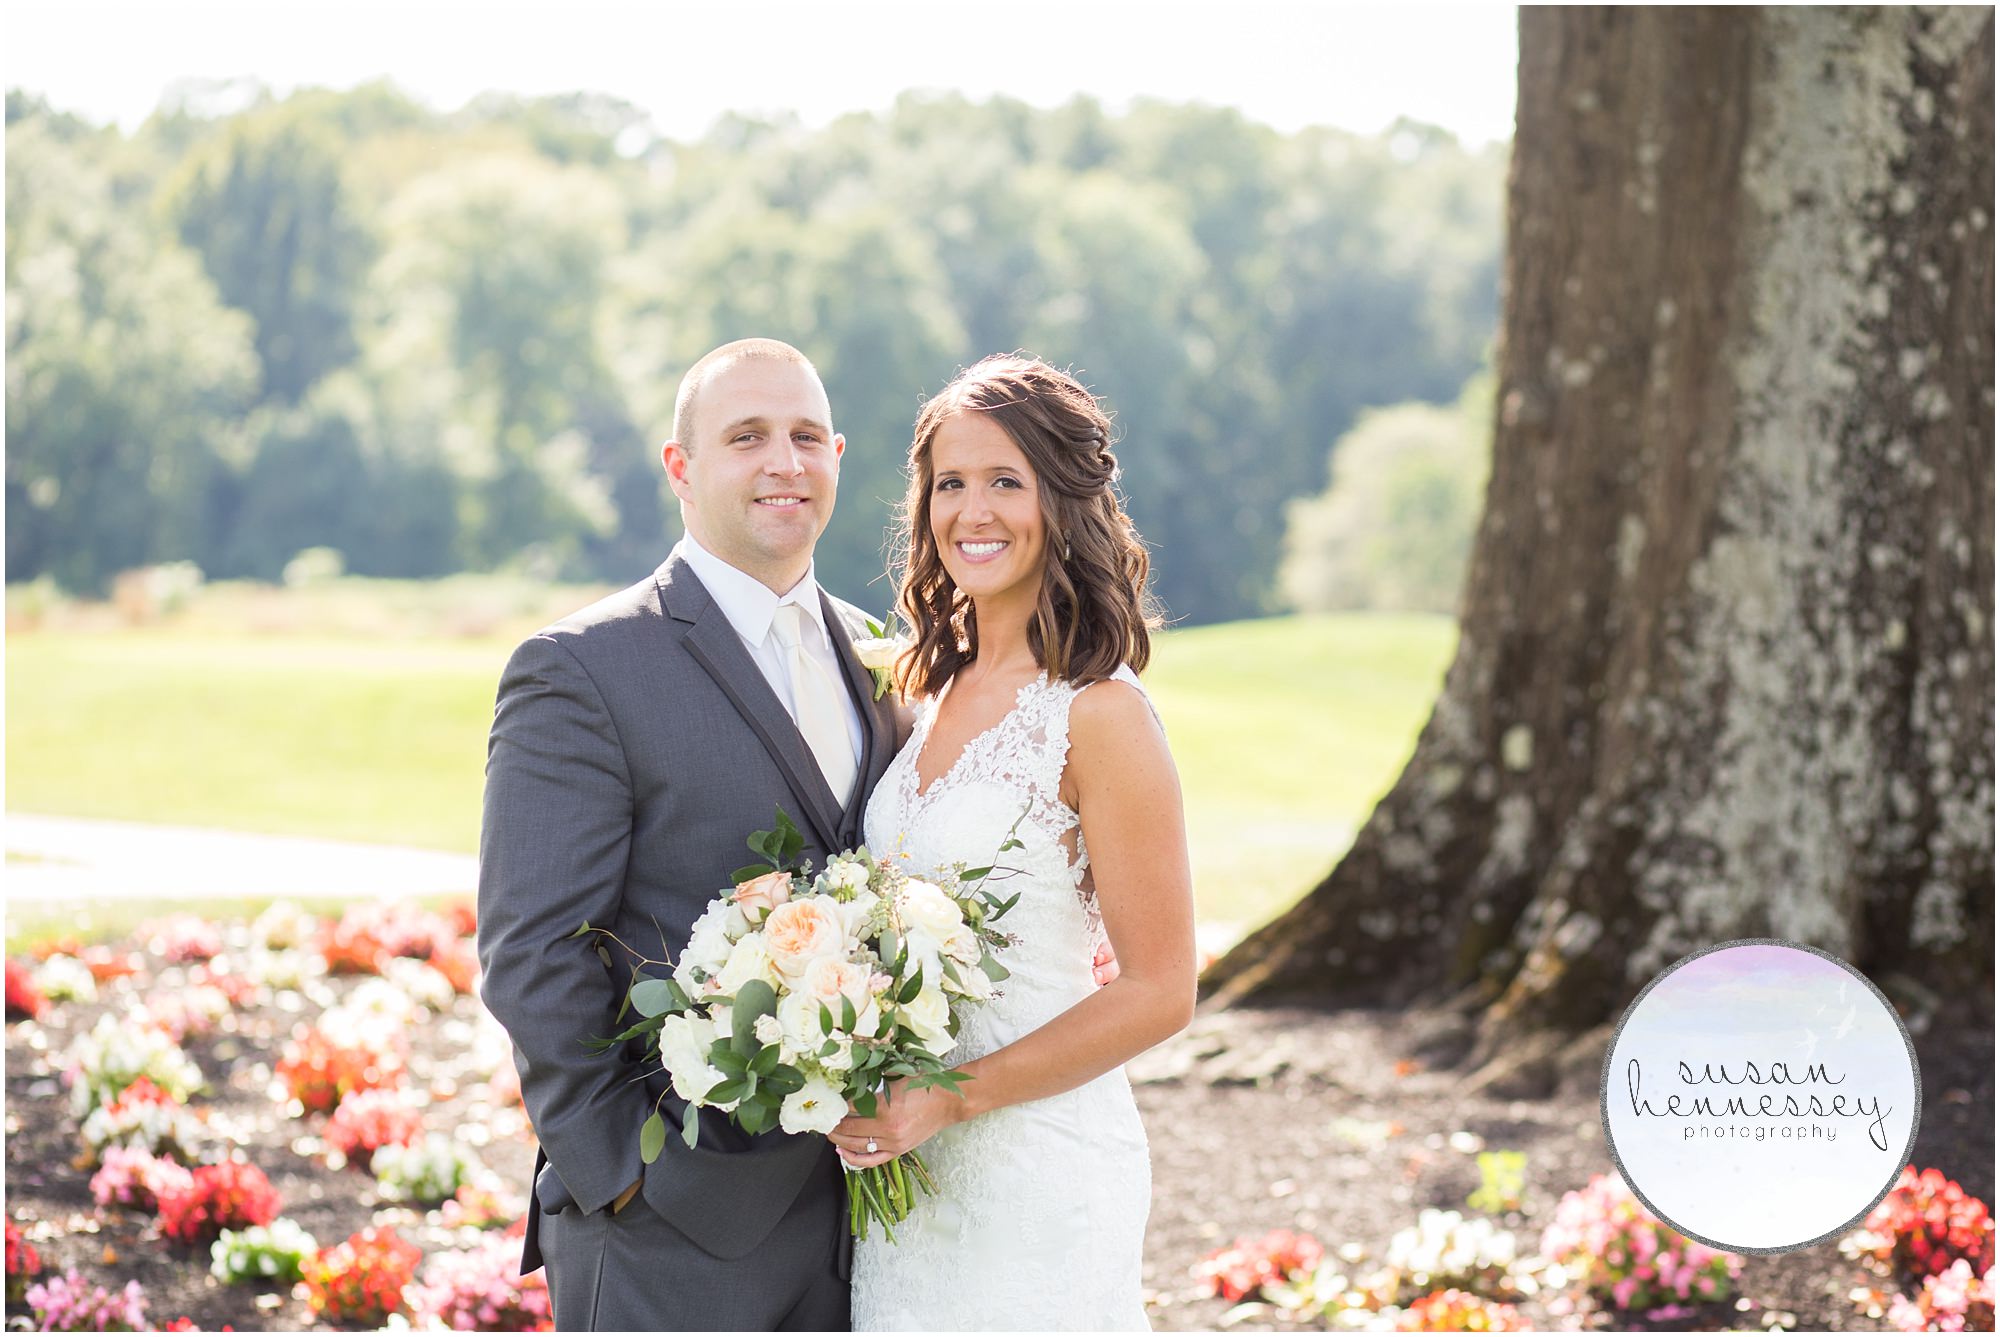 Bride and groom at Old York Country Club in Chesterfield, NJ